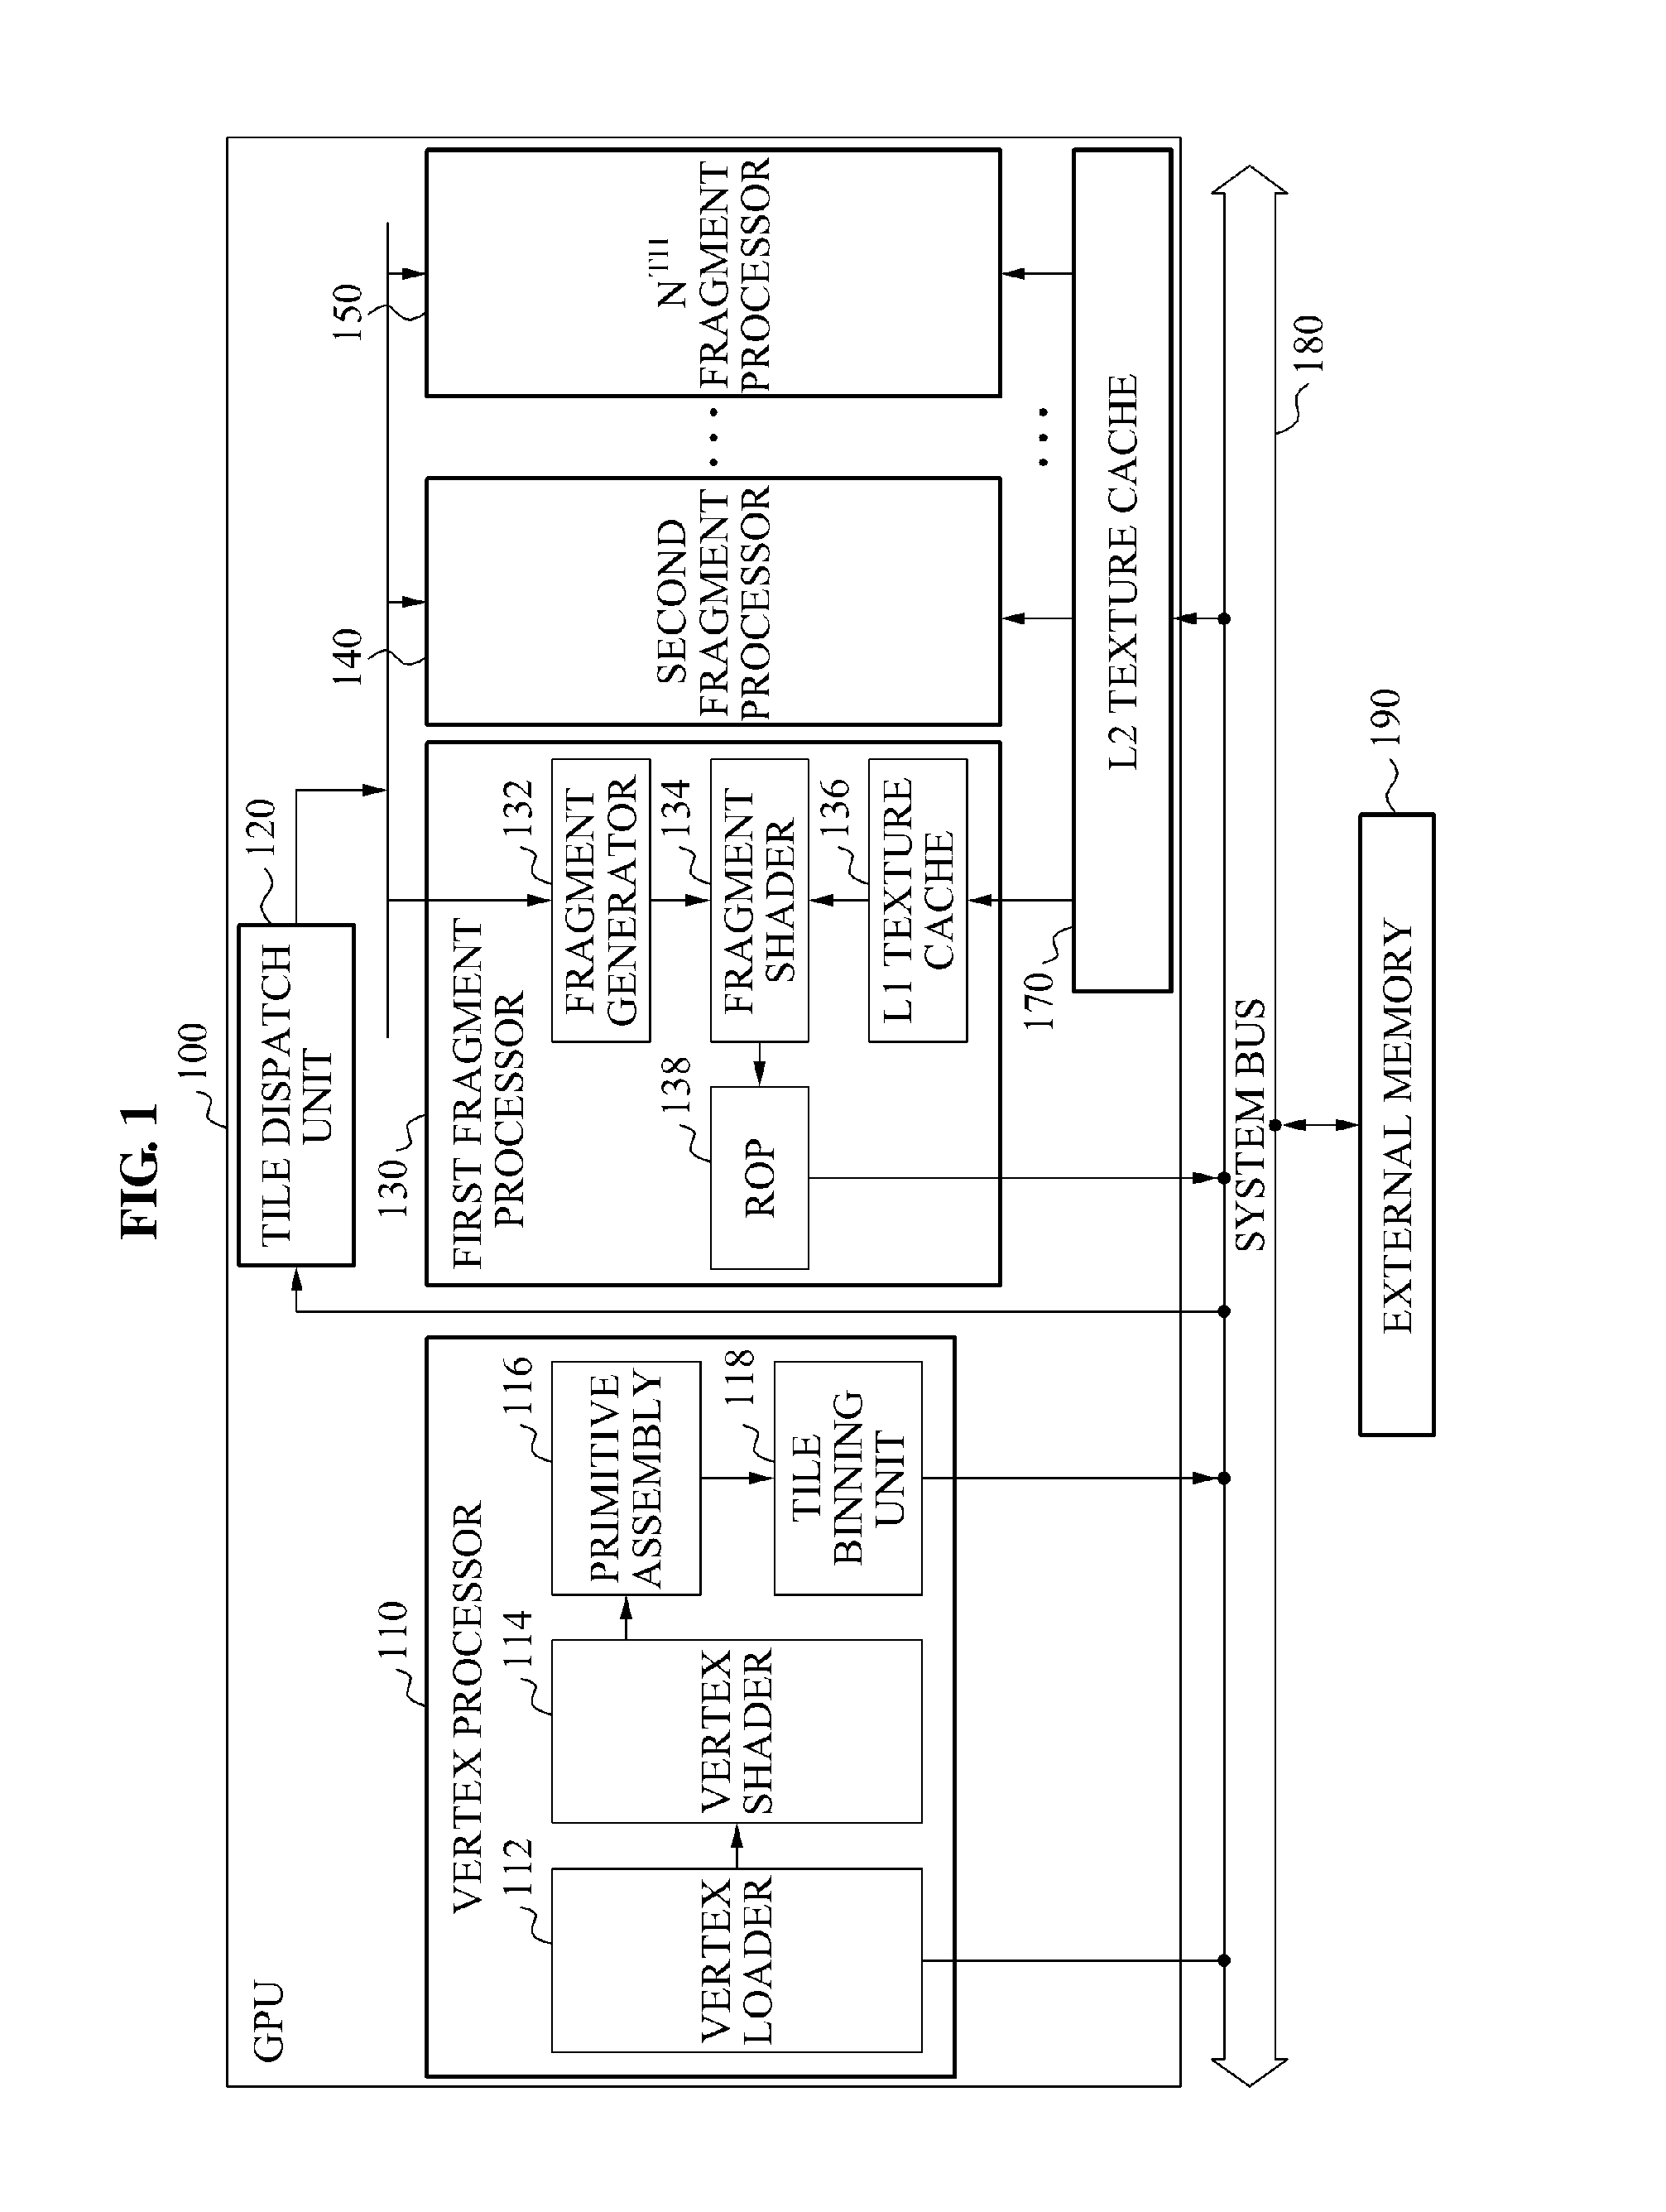 Method and apparatus for tile based rendering using tile-to-tile locality